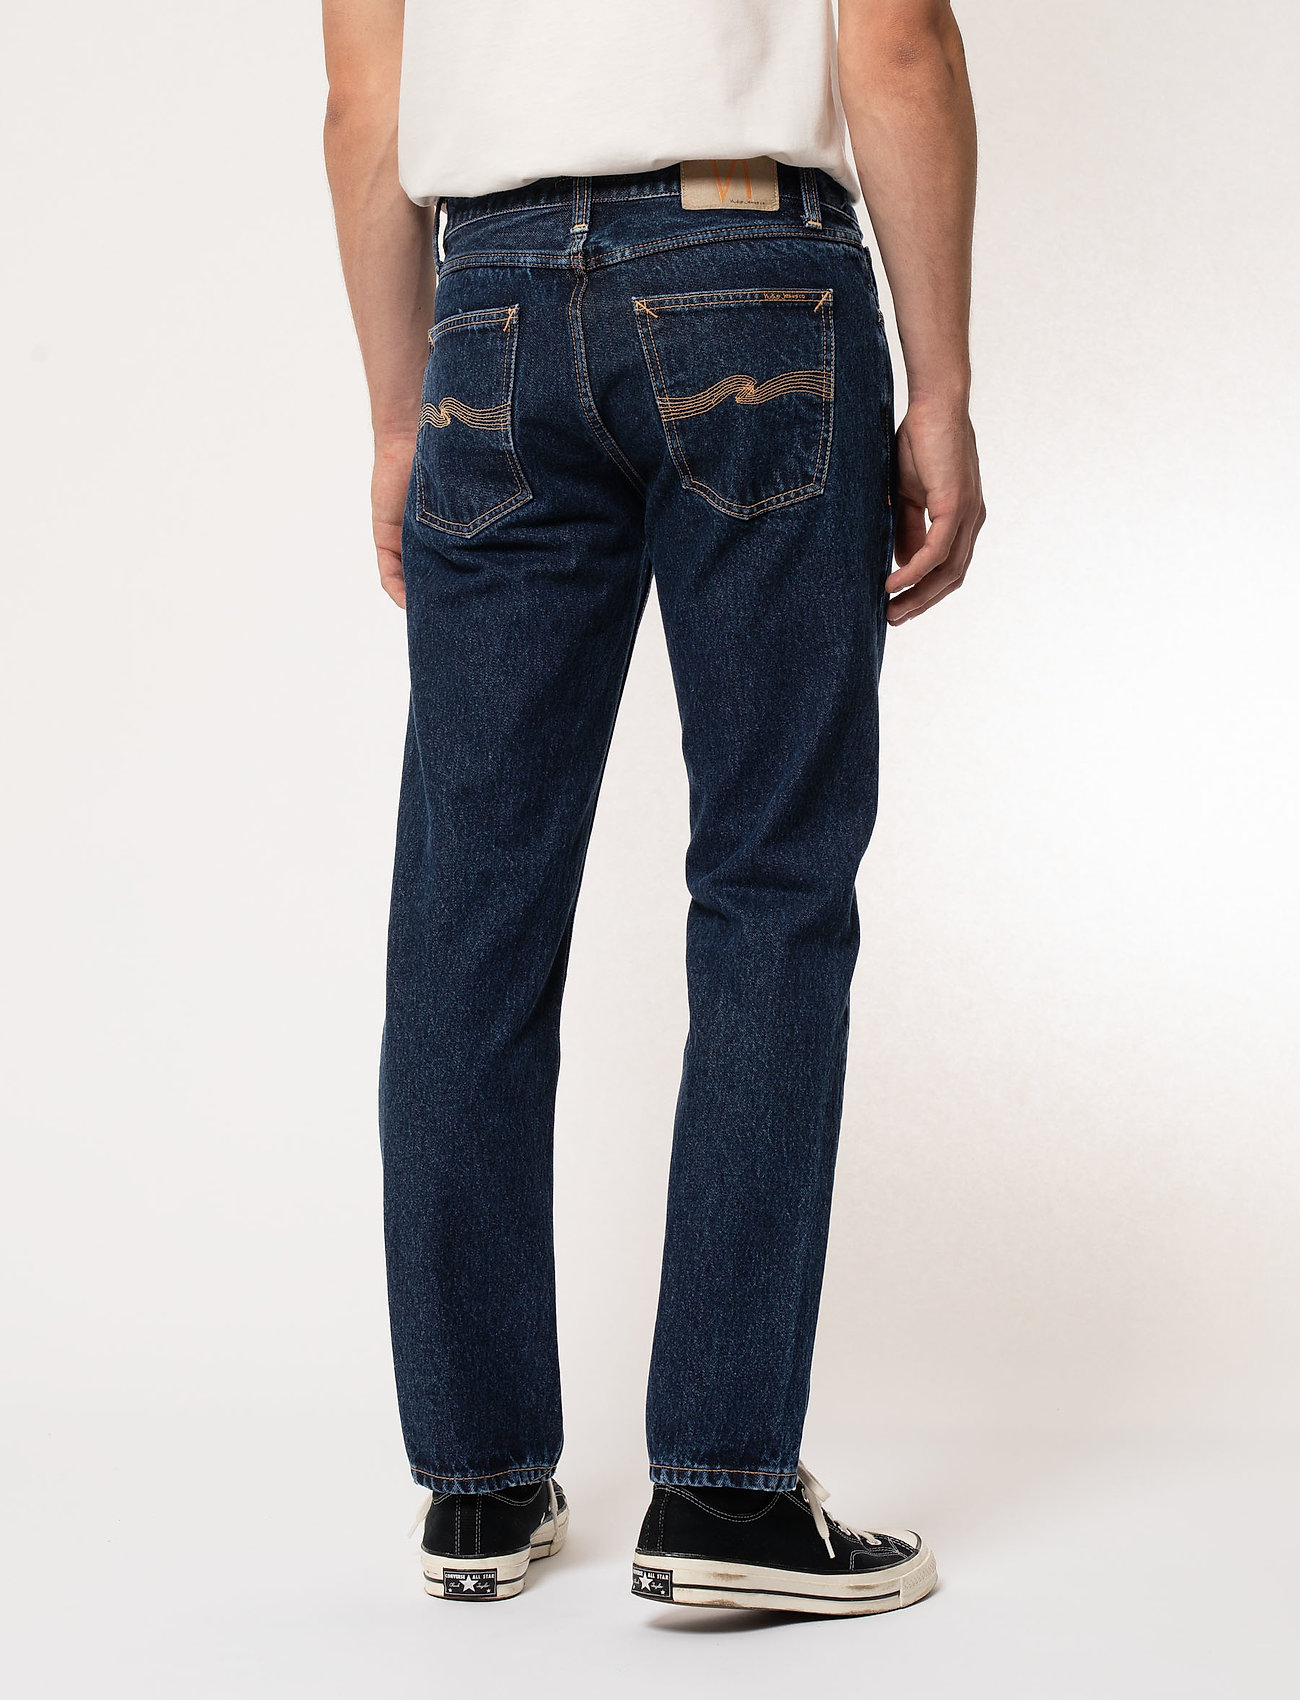 Nudie Jeans - Gritty Jackson - regular jeans - heavy rinse - 3